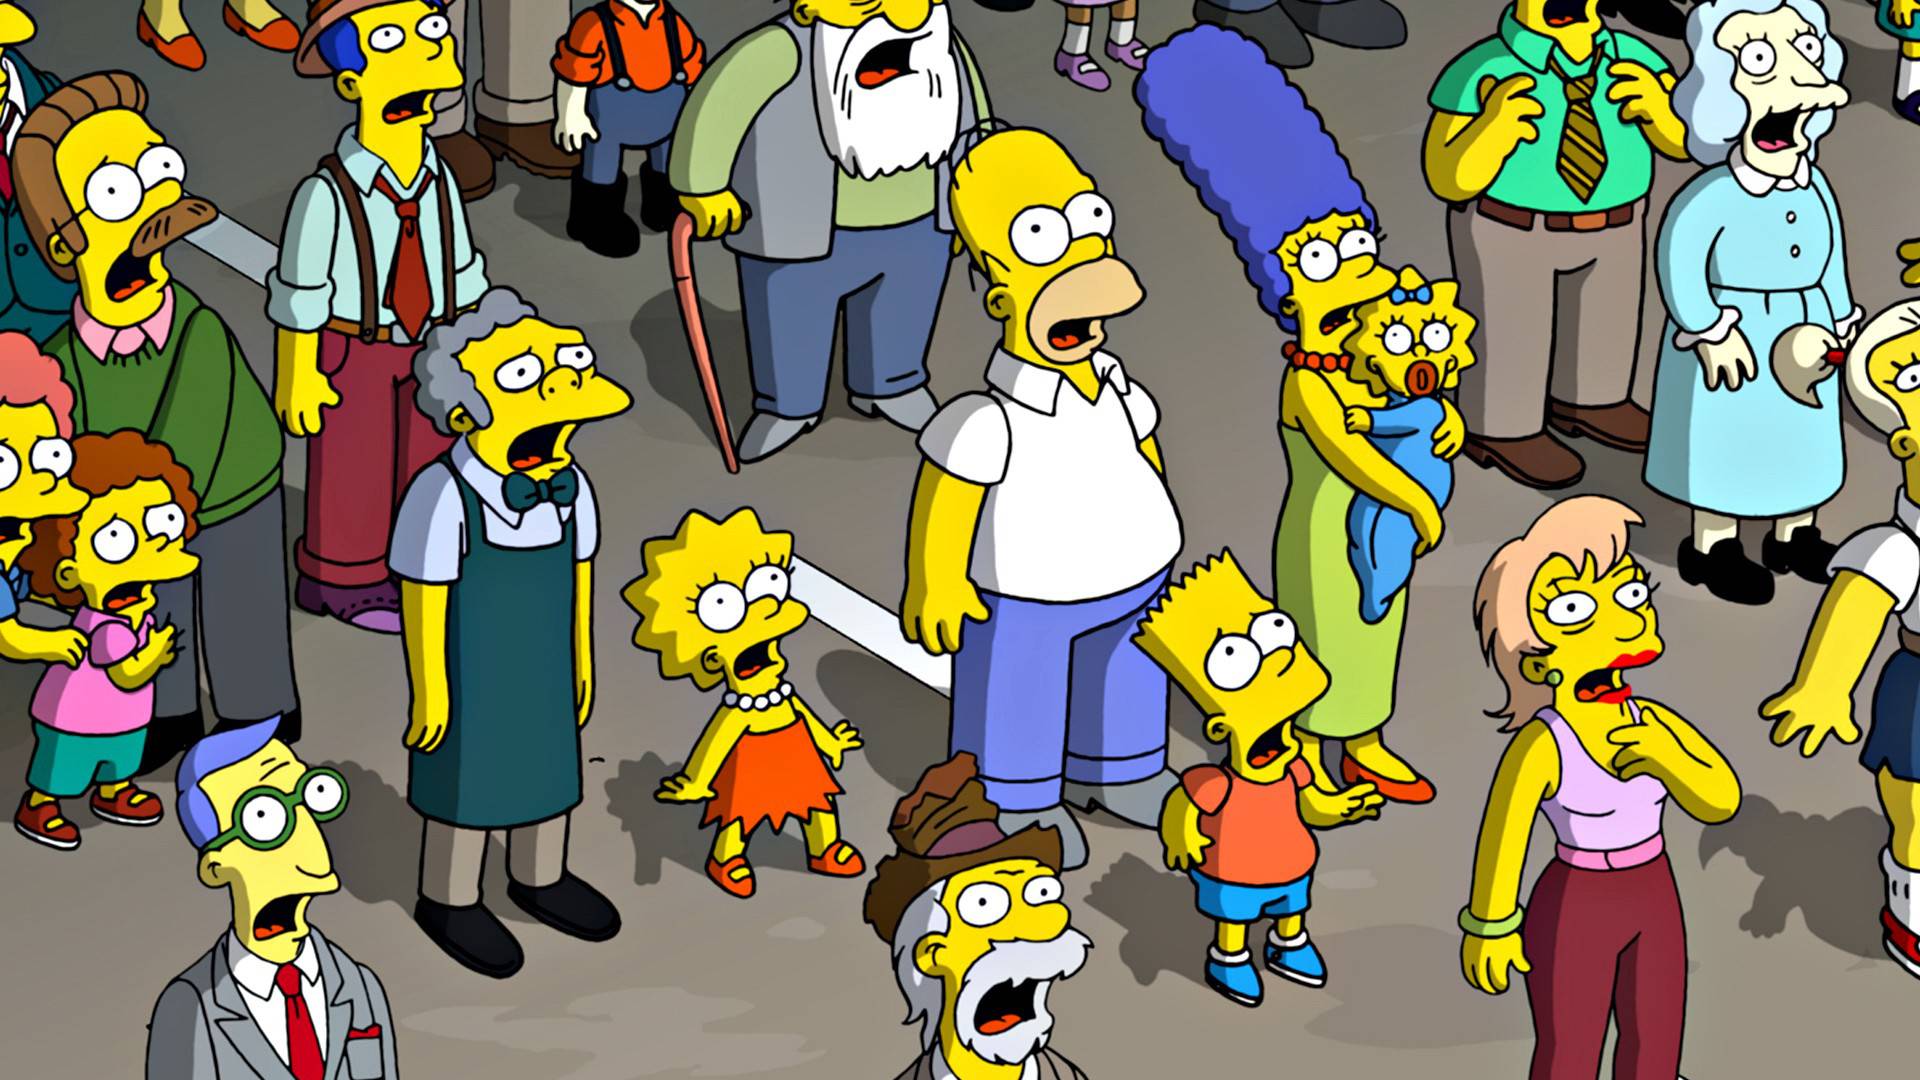 The simpsons wallpaper [4] - (#21461) - High Quality and ...